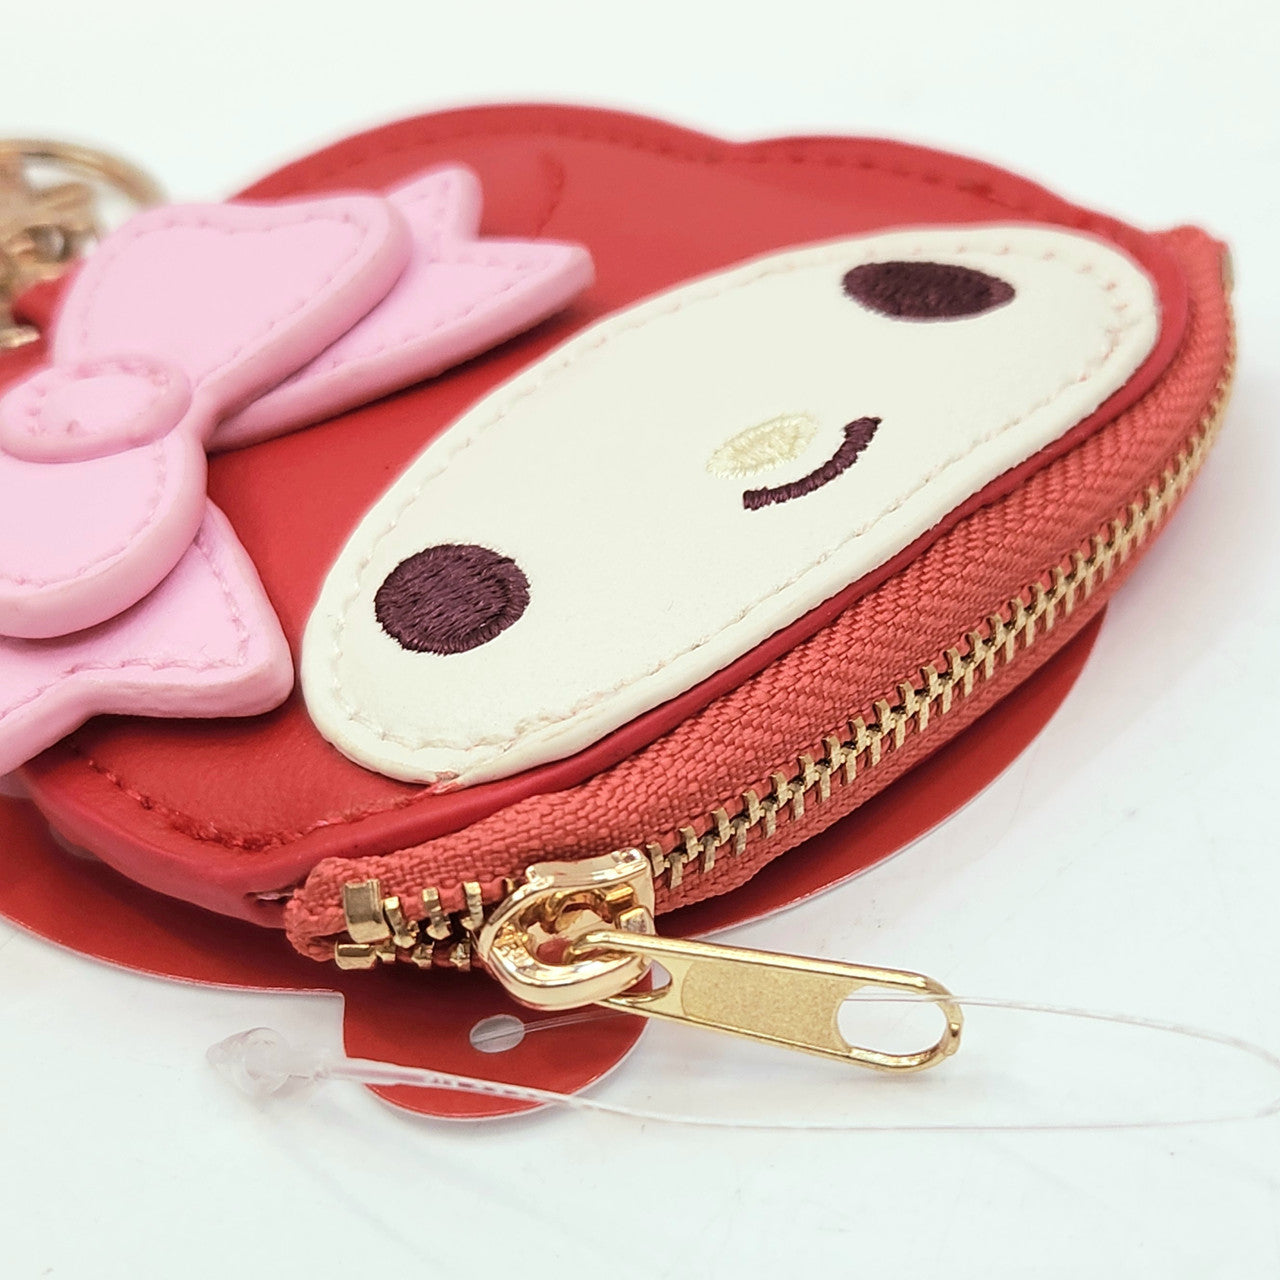 My Melody Coin Case with Holder